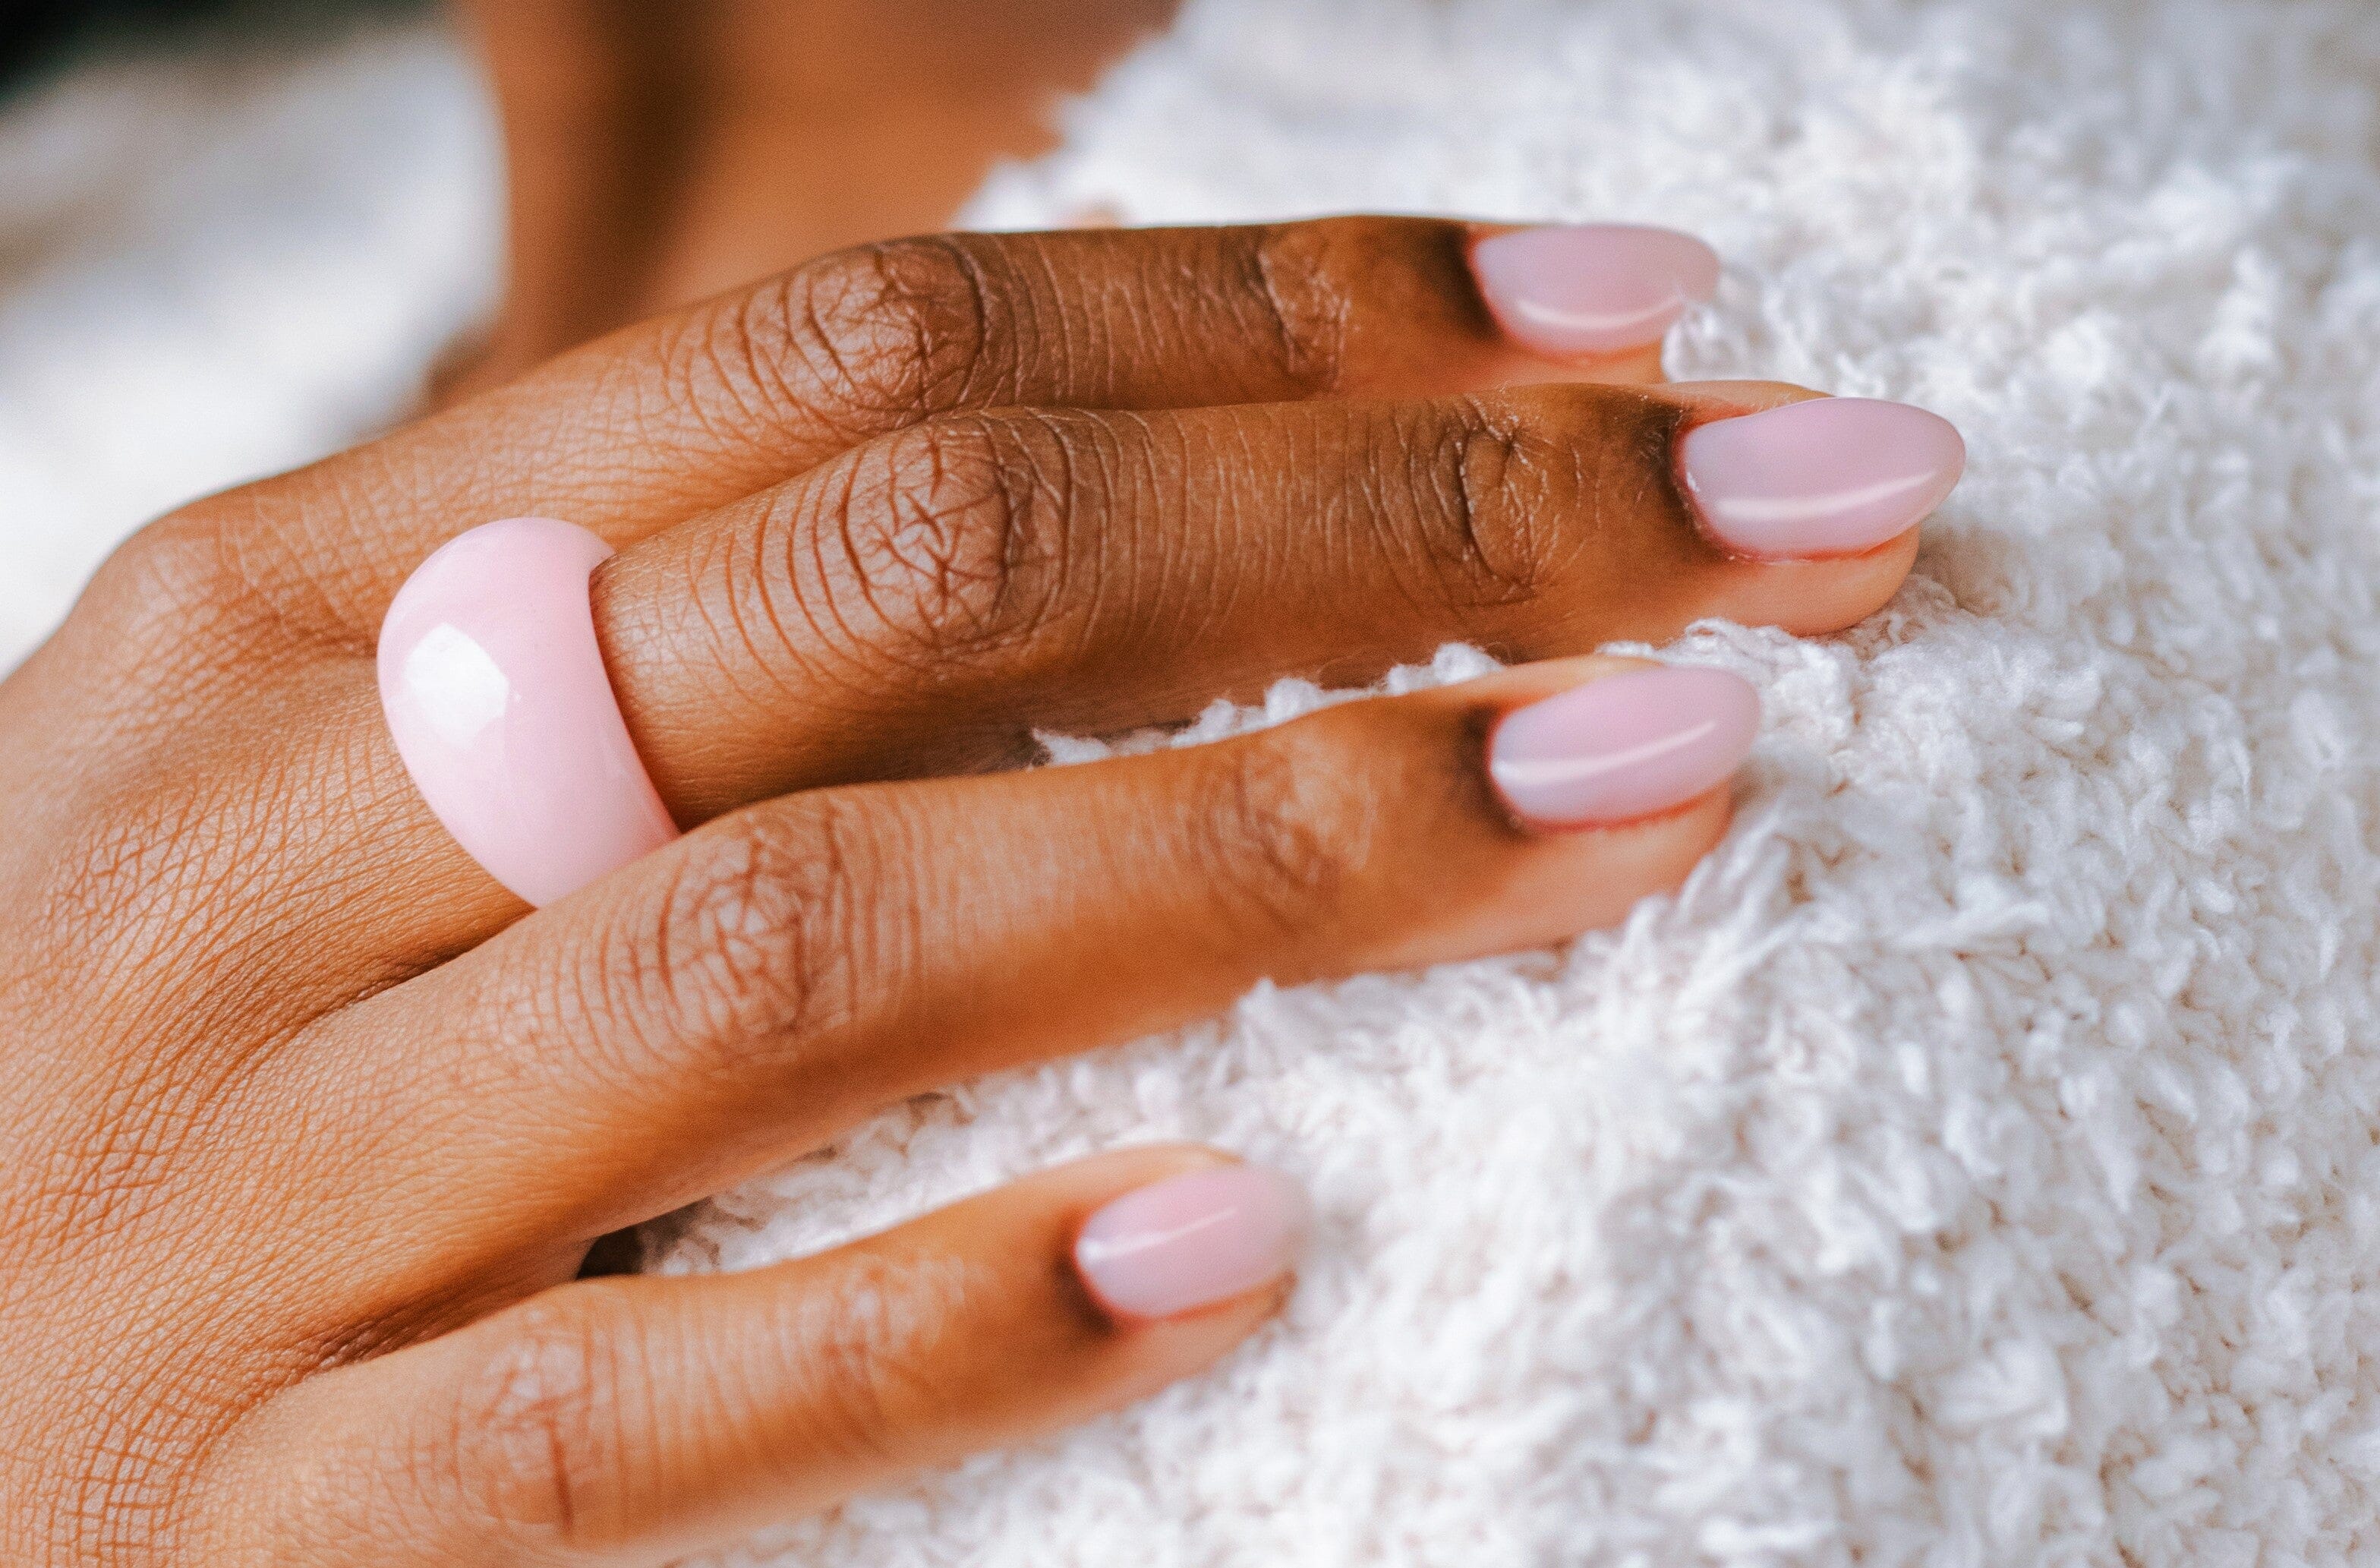 What are aesthetic nails?